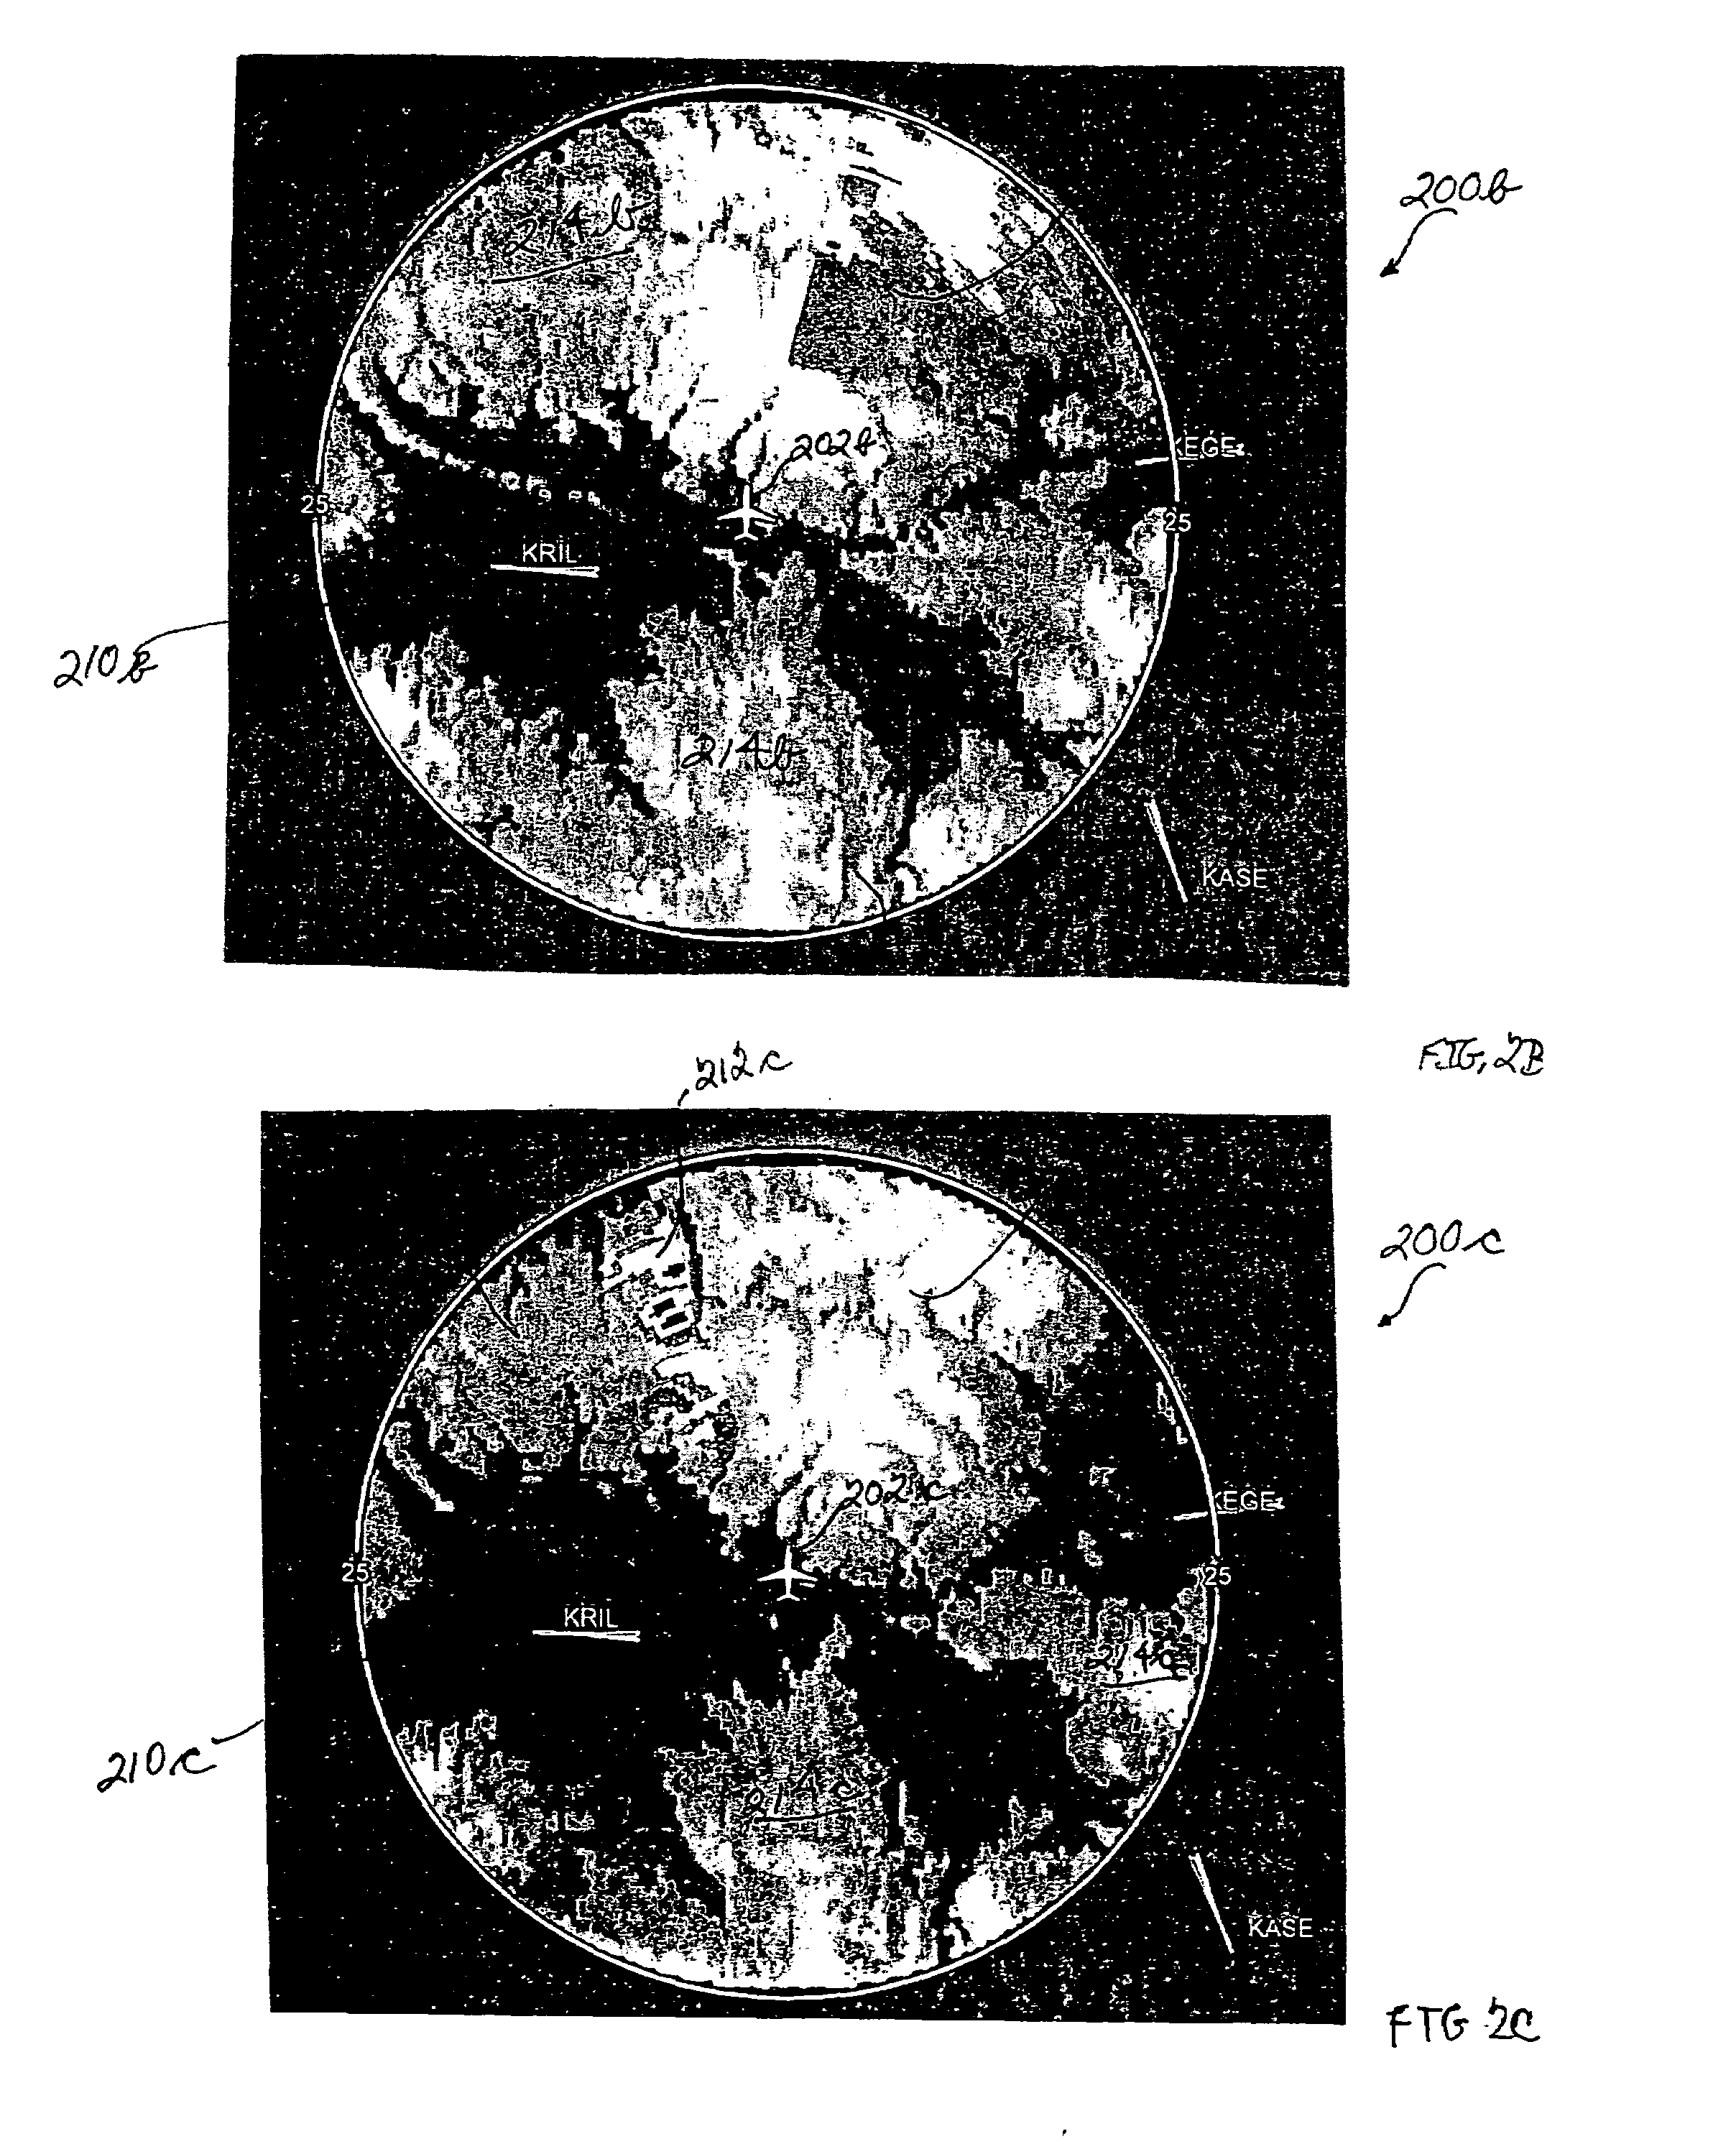 System and method for eliminating confusion between weather data and terrain data in aircraft displays